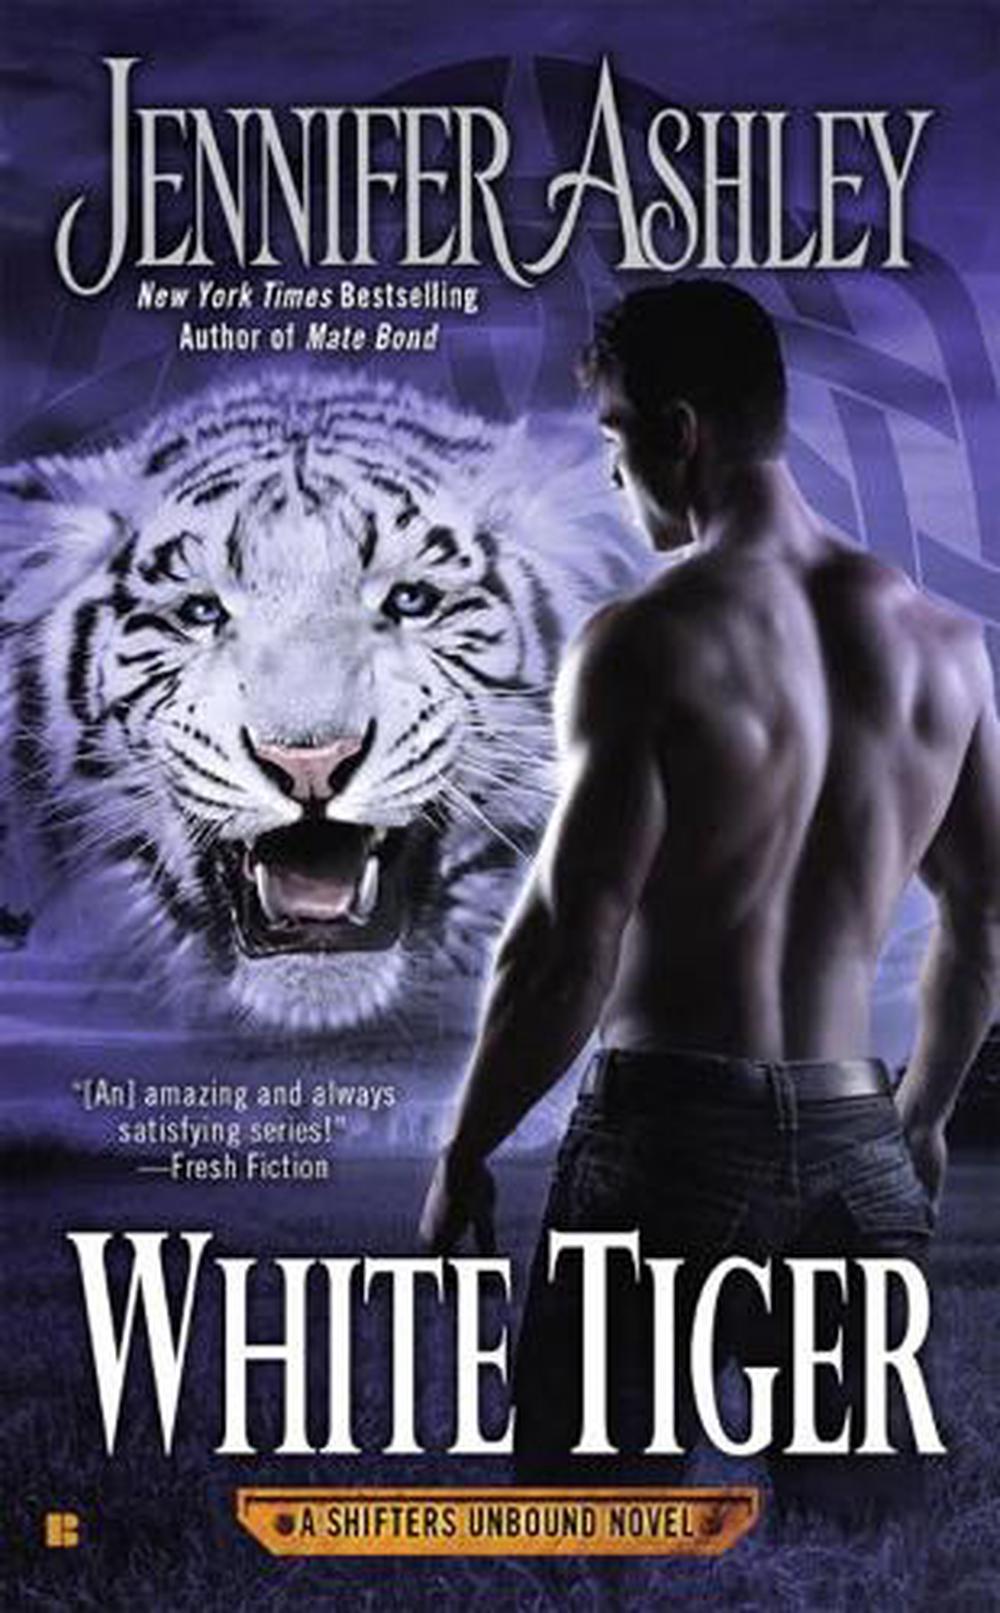 review of the book white tiger